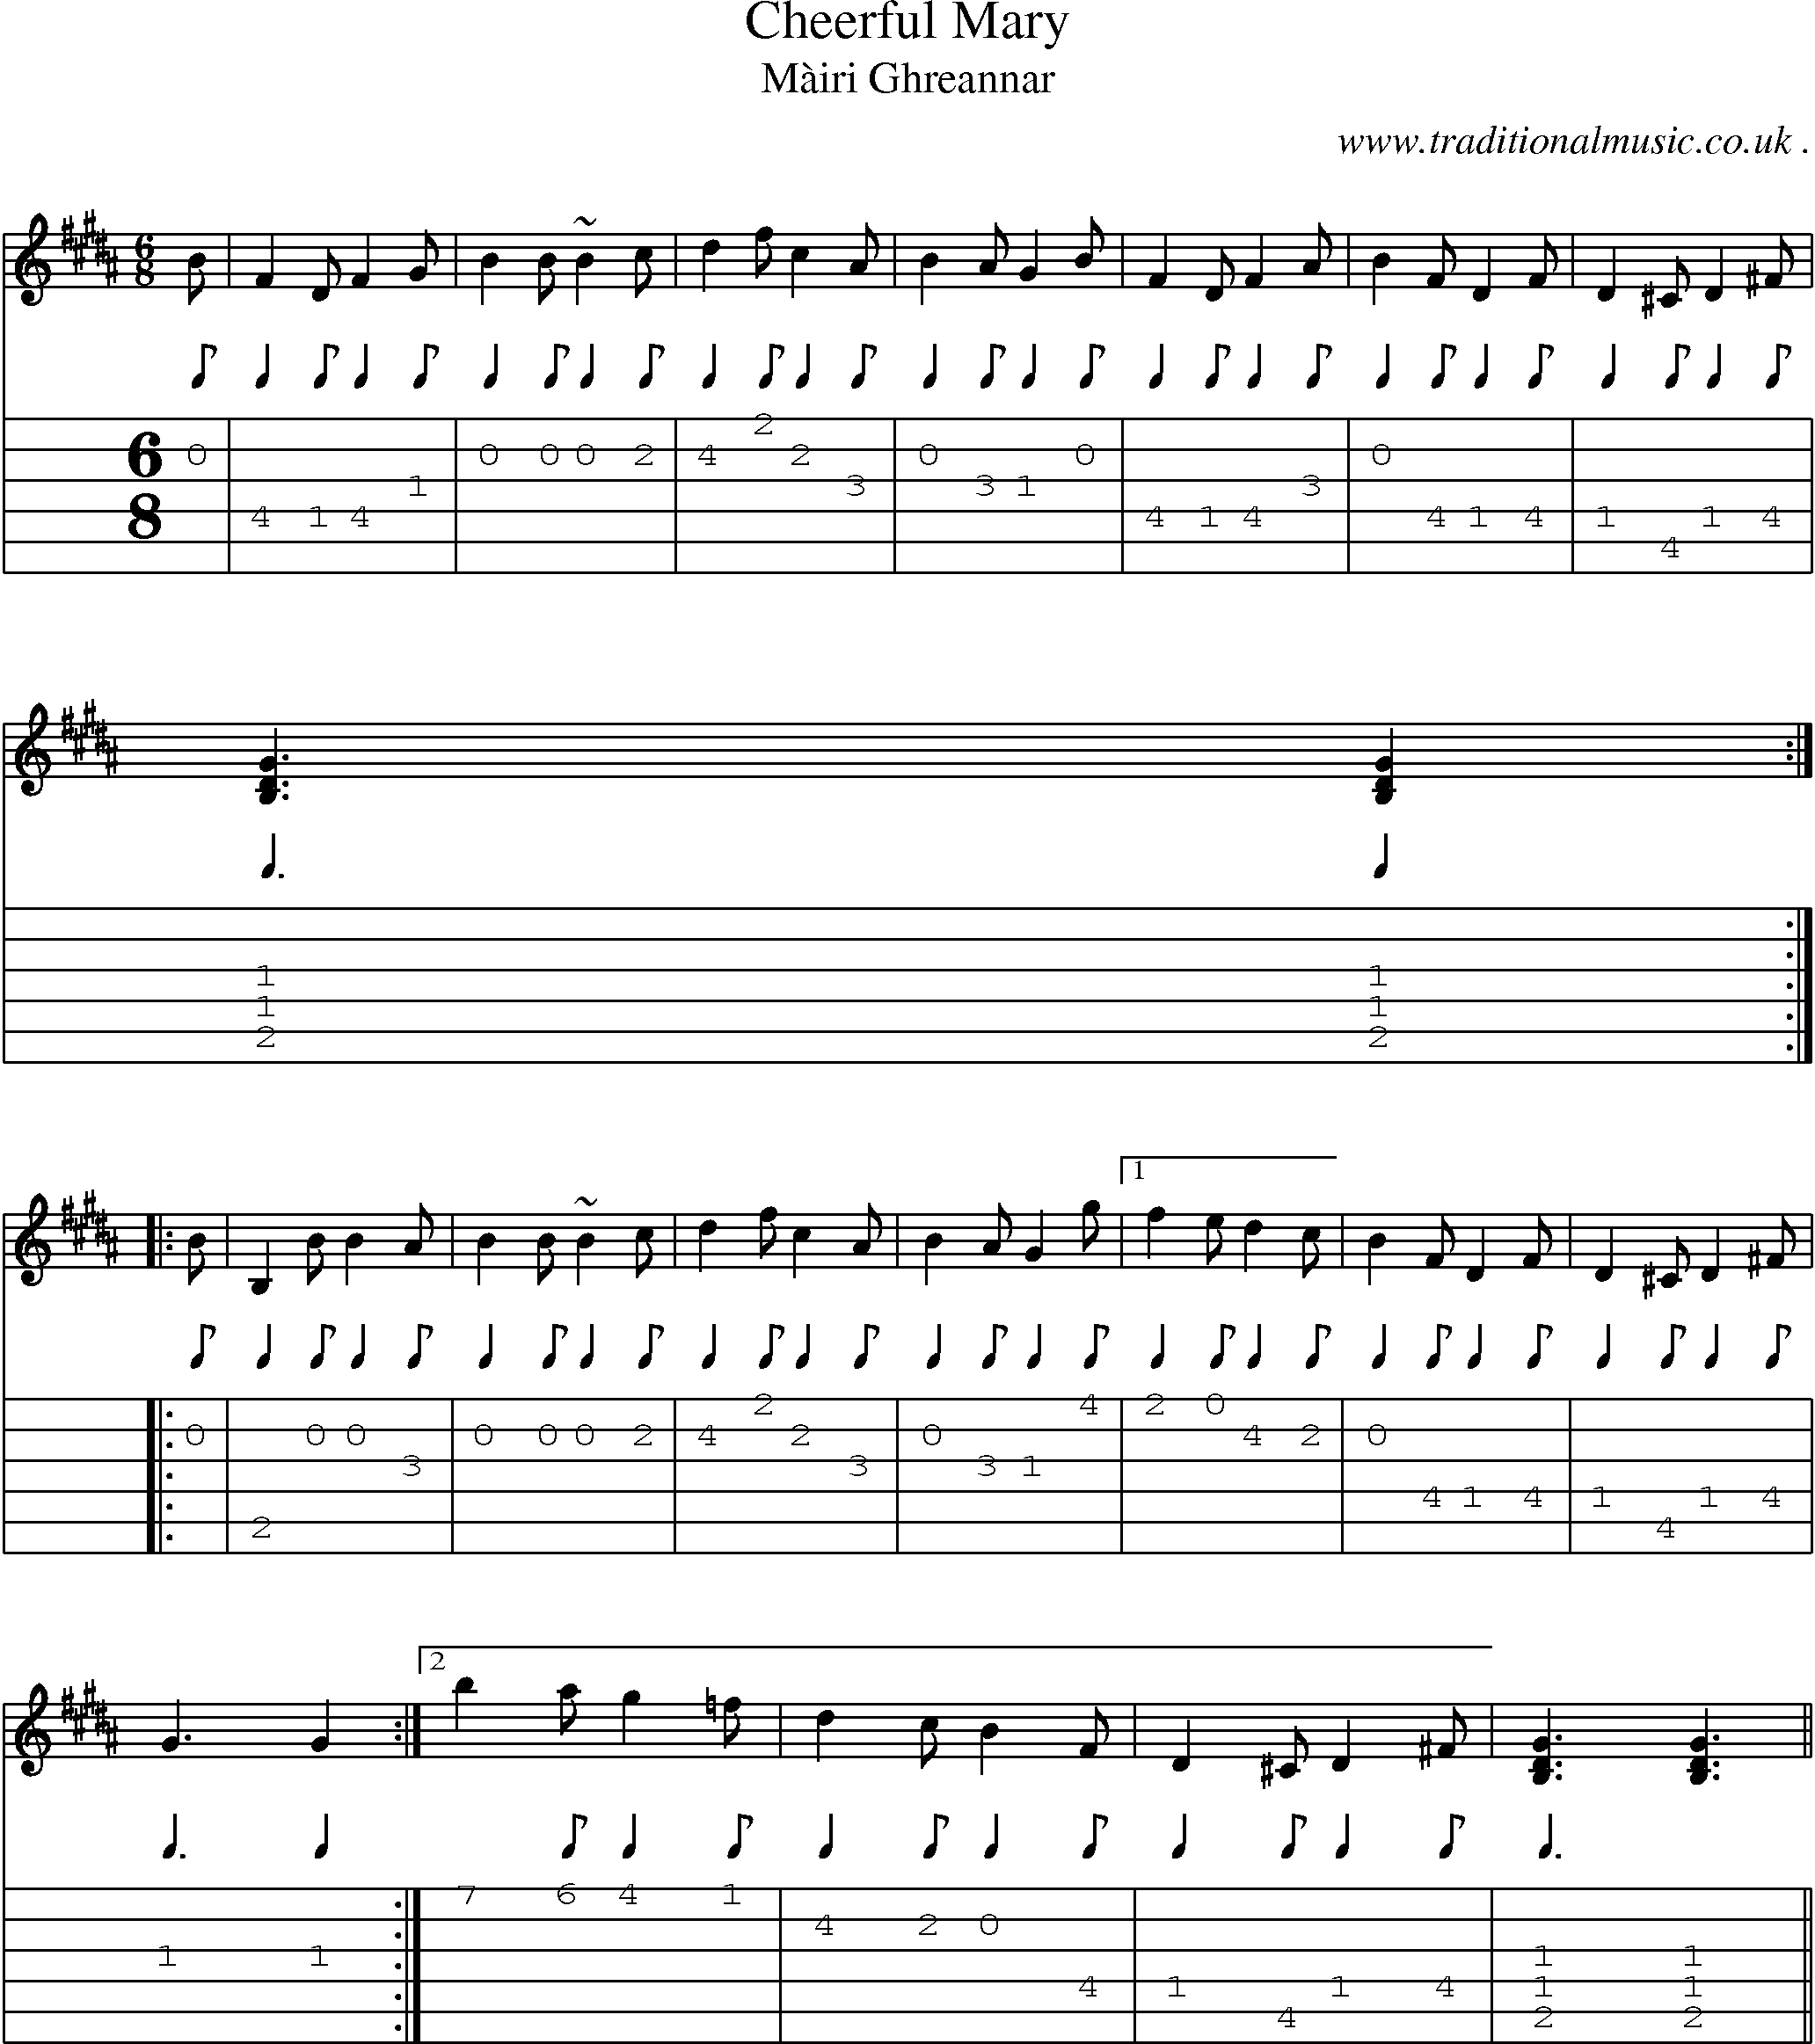 Sheet-music  score, Chords and Guitar Tabs for Cheerful Mary